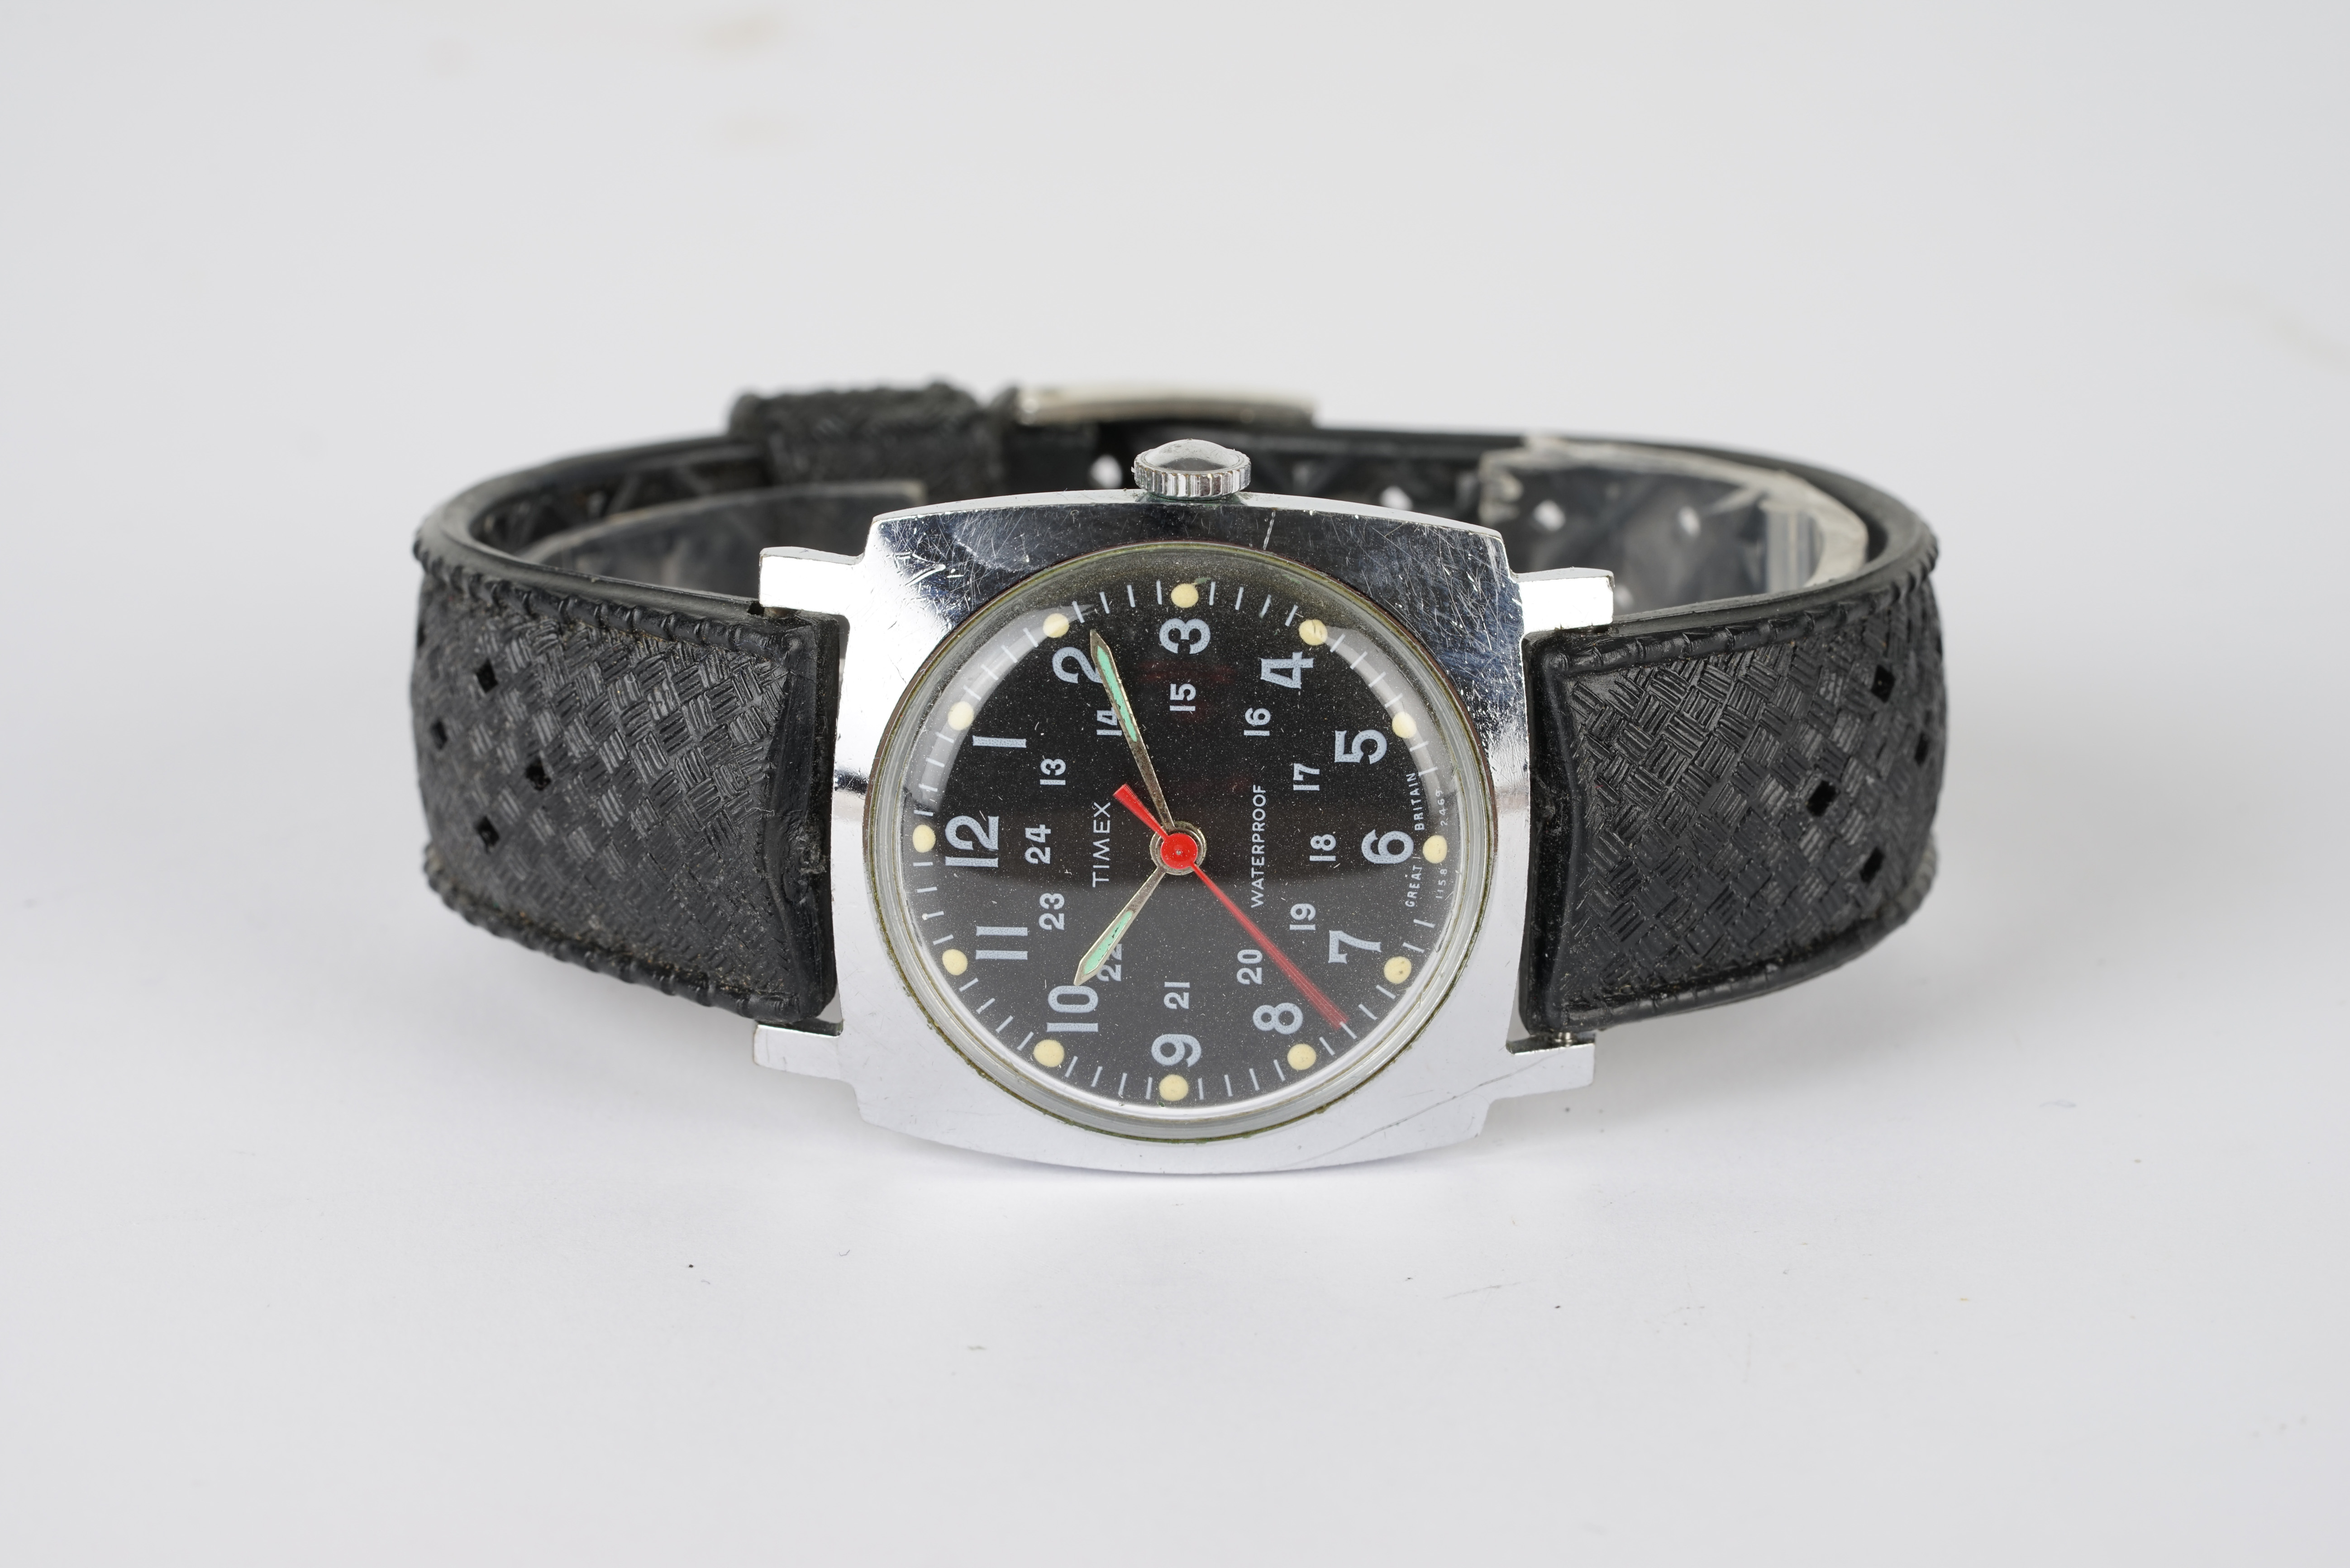 GENTLEMENS TIMEX 24HR WRISTWATCH, circular 24hr black dial with arabic numeral hour markers and